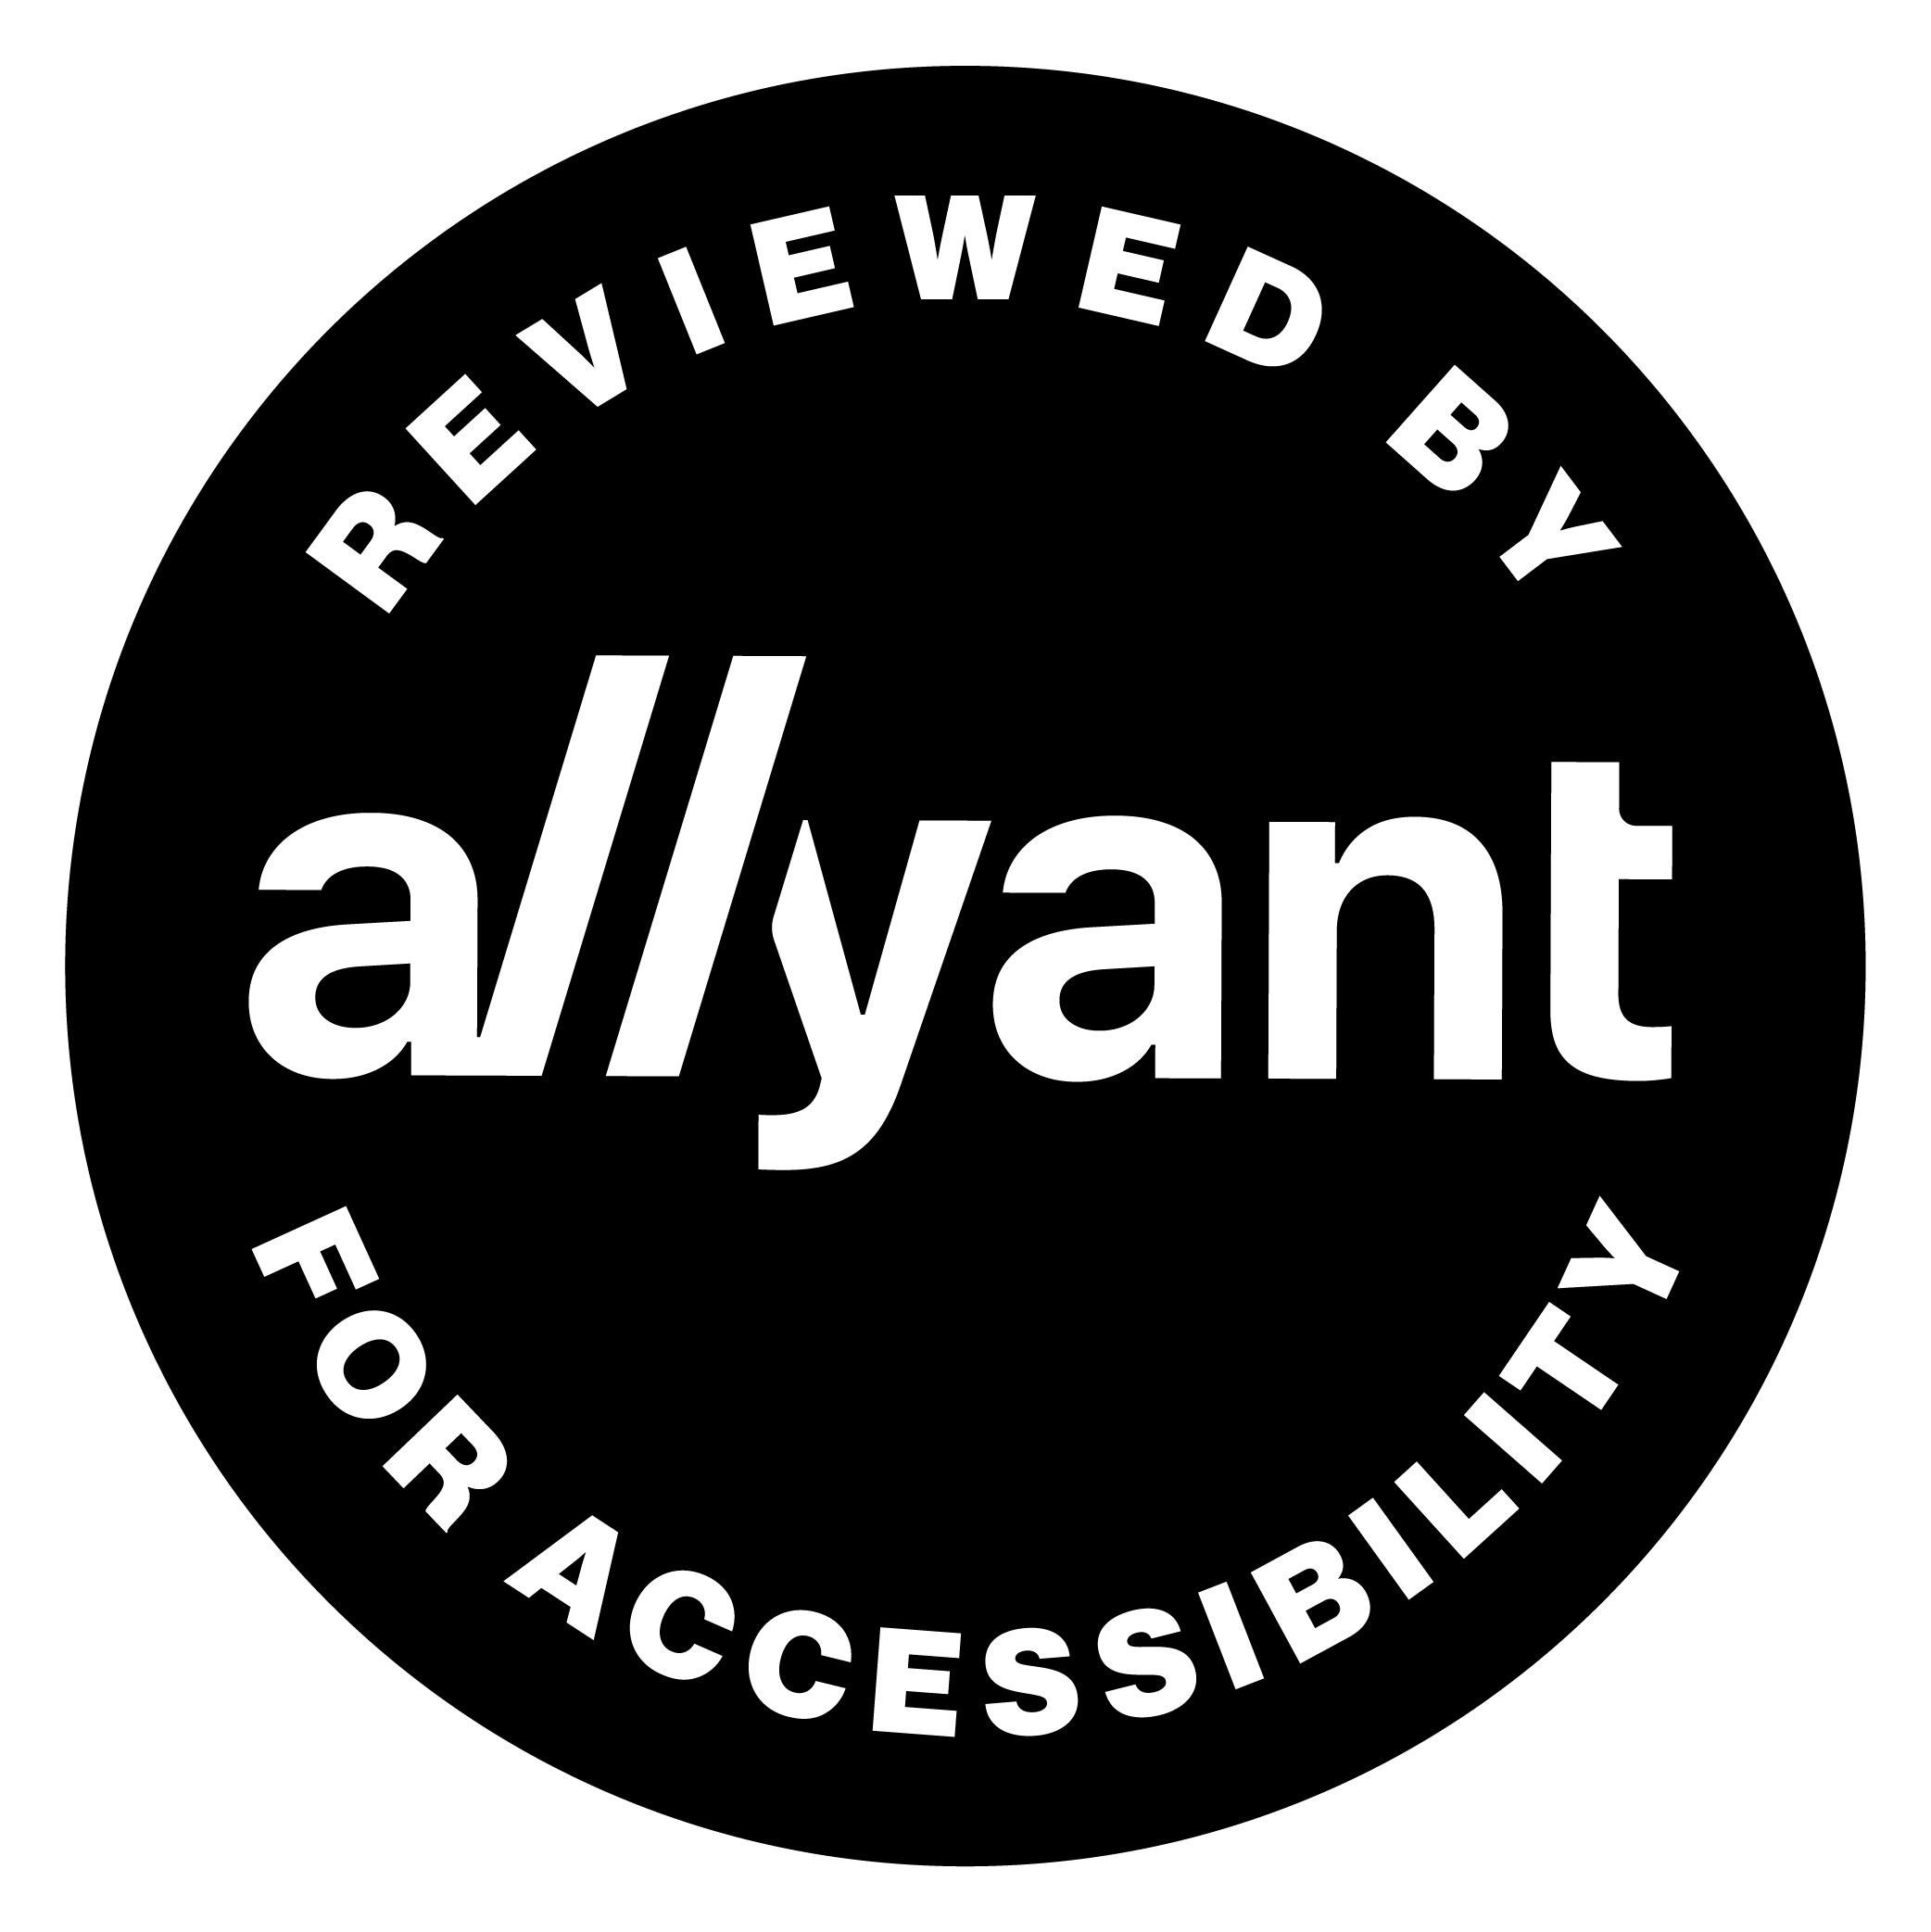 Reviewed by allyant for accessibility badge.